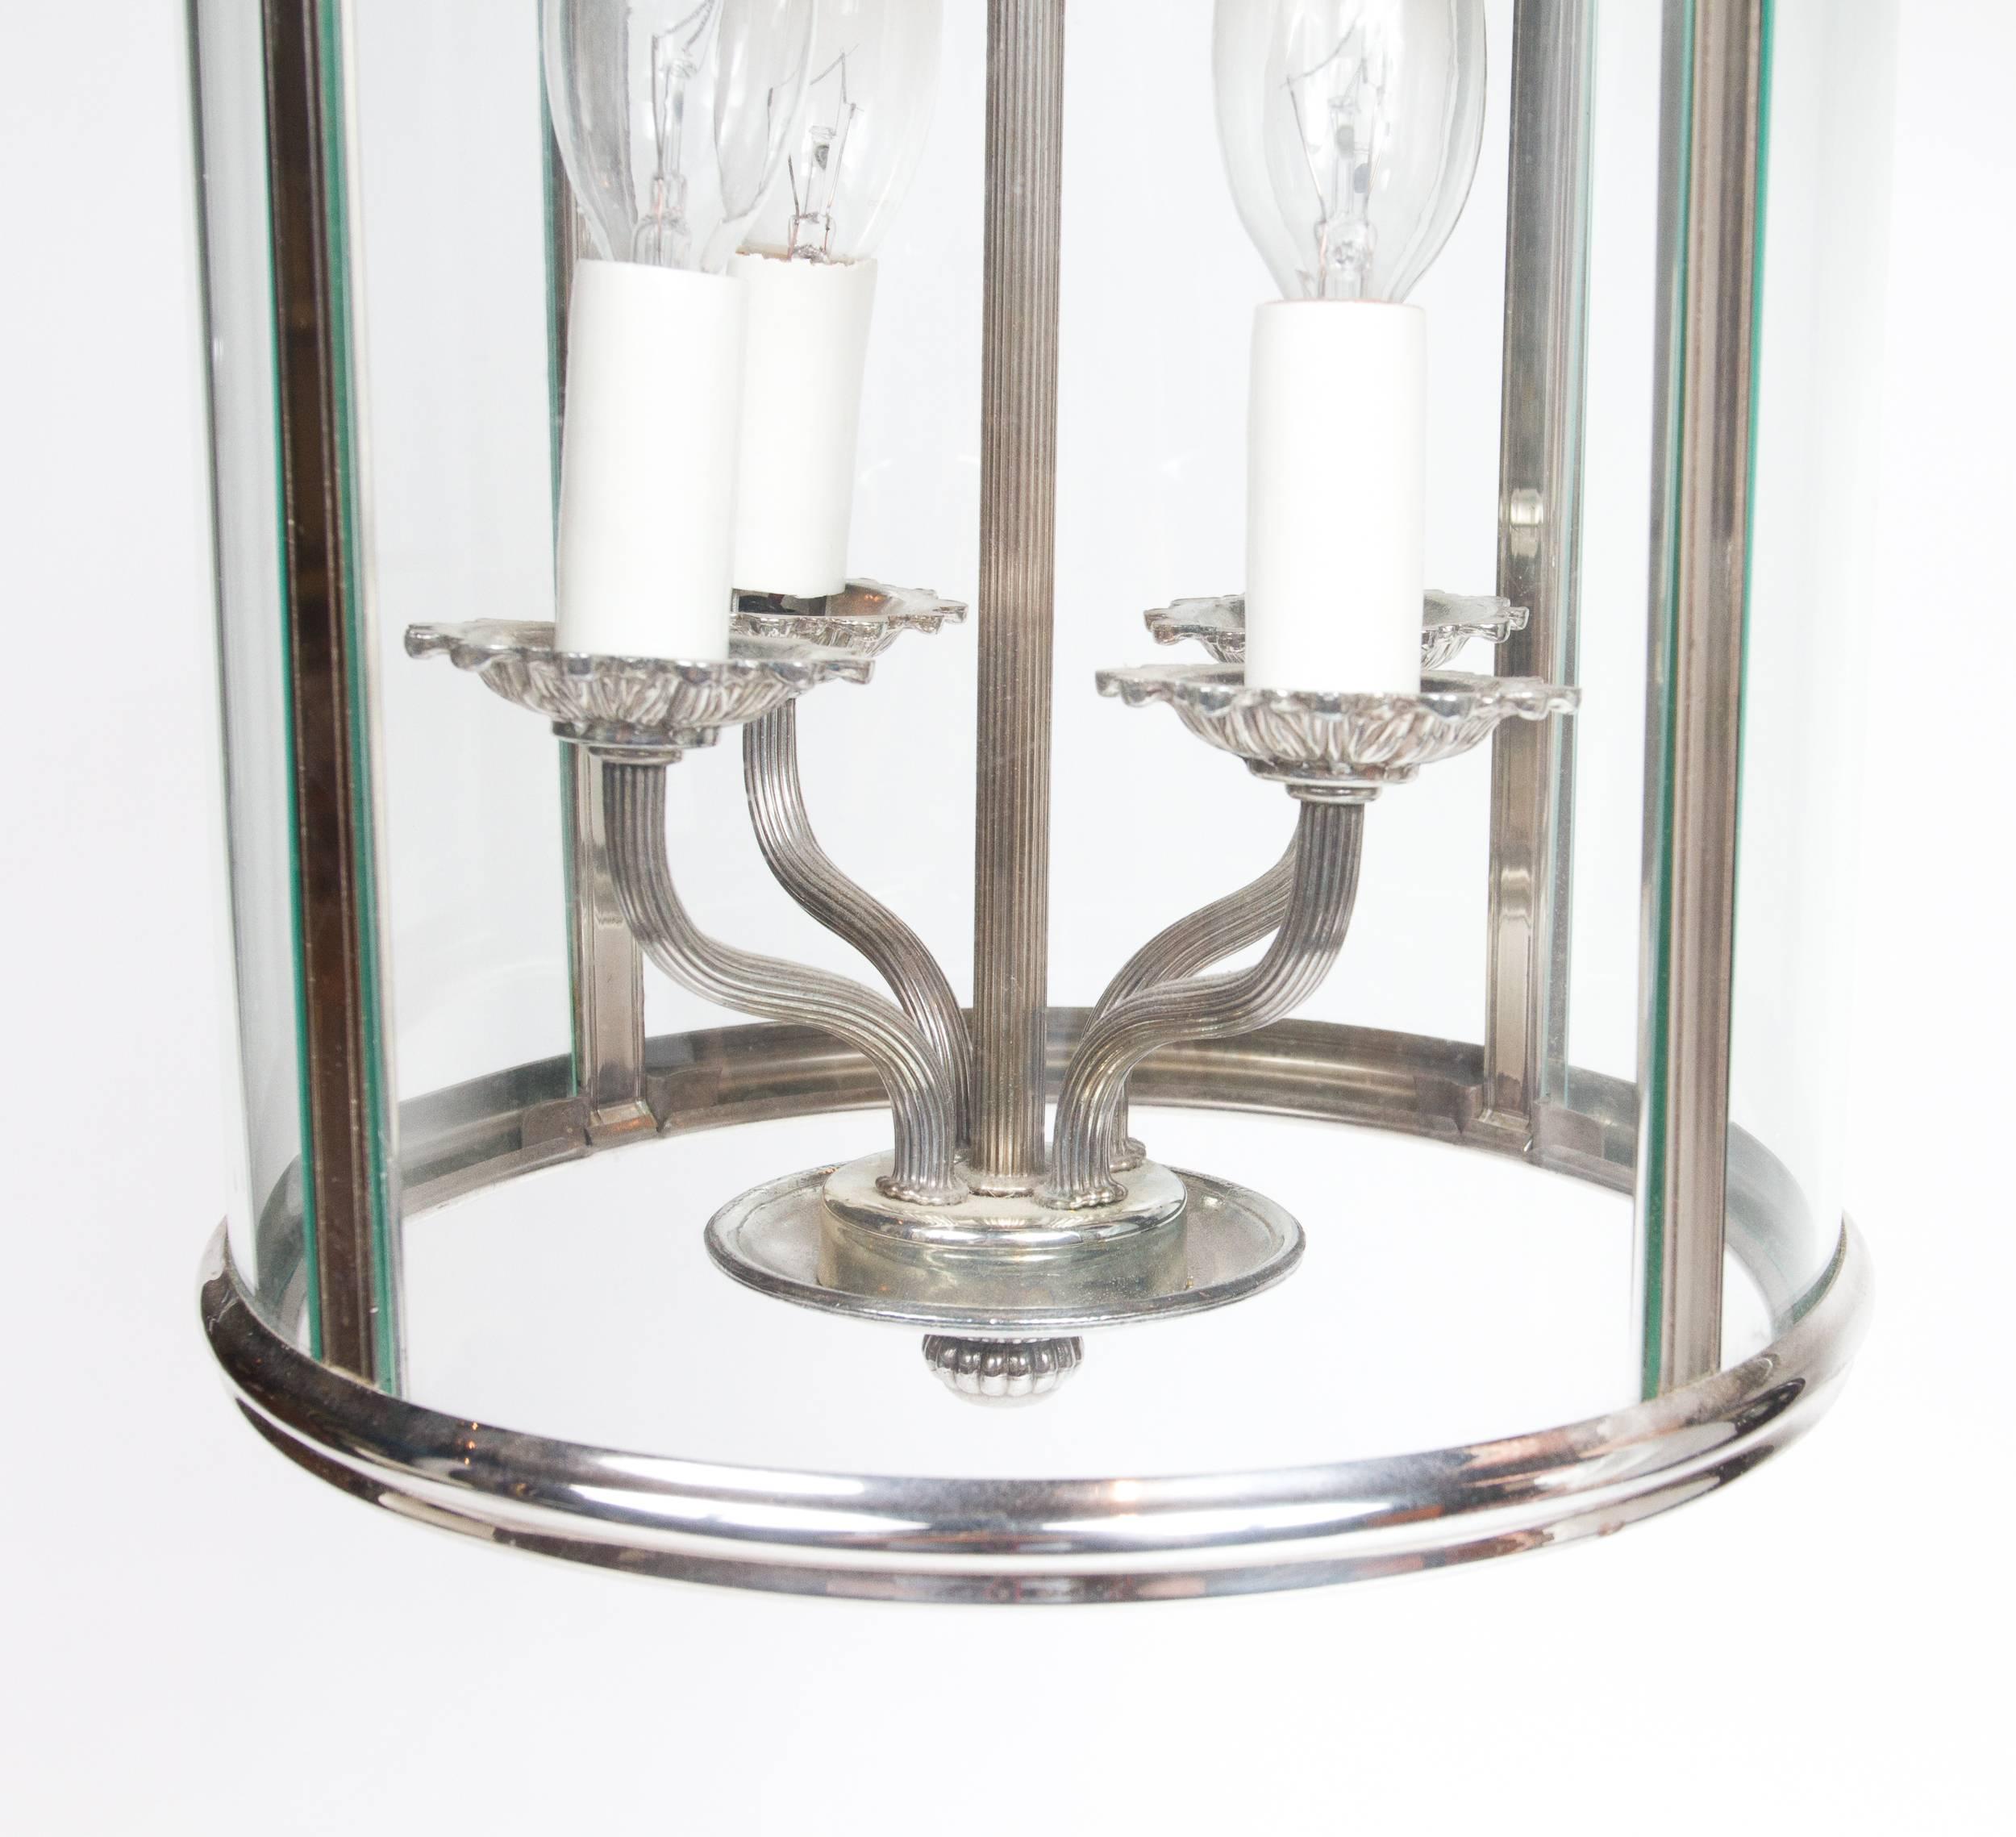 Set of four beautiful silvered bronzed, neoclassical style hanging lanterns by Sciolari.